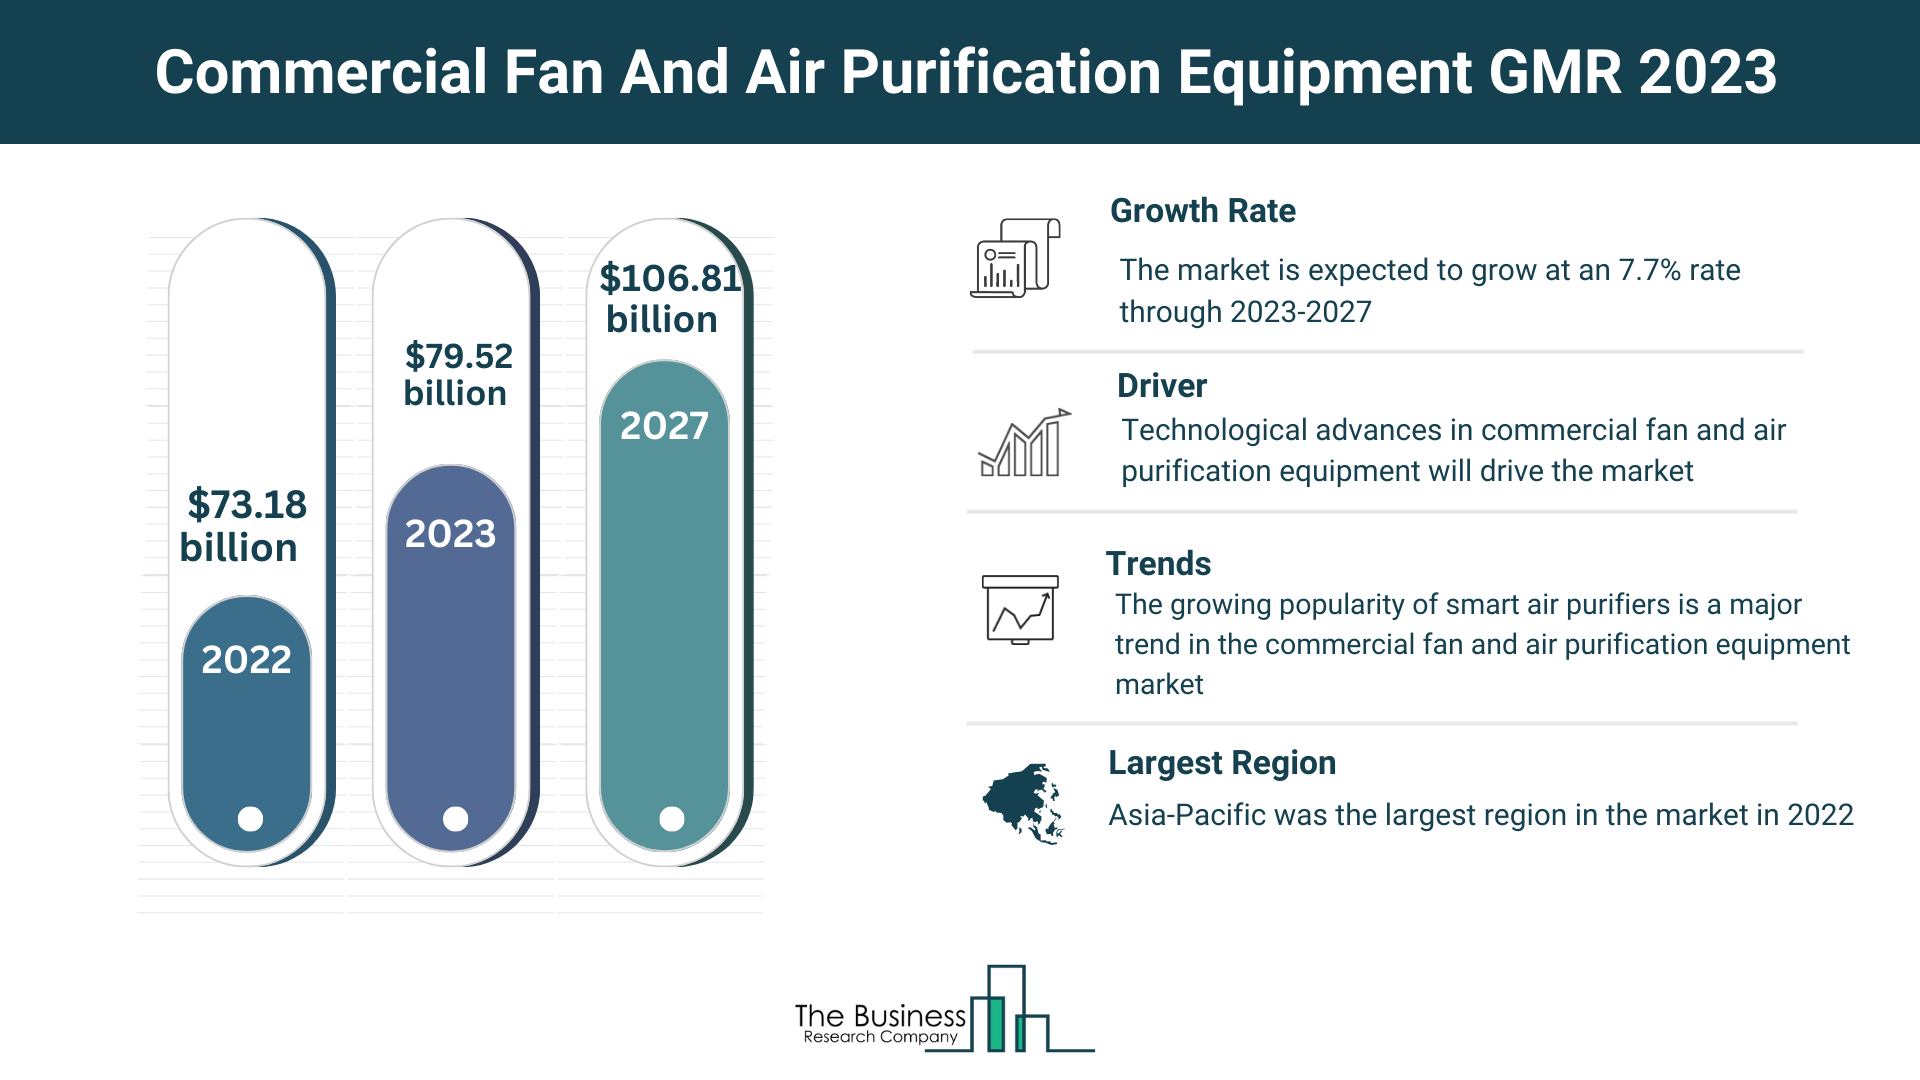 What Are The 5 Takeaways From The Commercial Fan And Air Purification Equipment Market Overview 2023